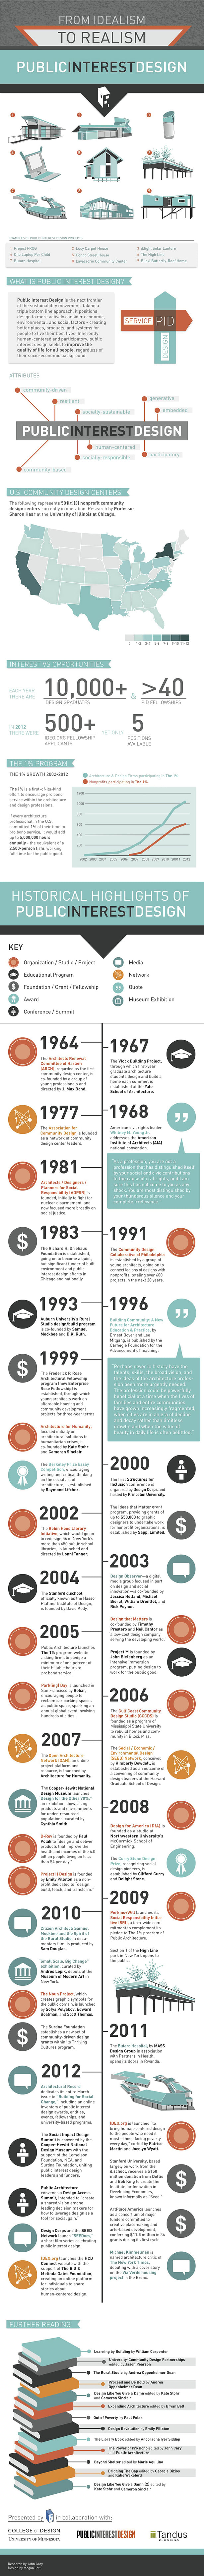 Infographic- A History of Public Interest Design